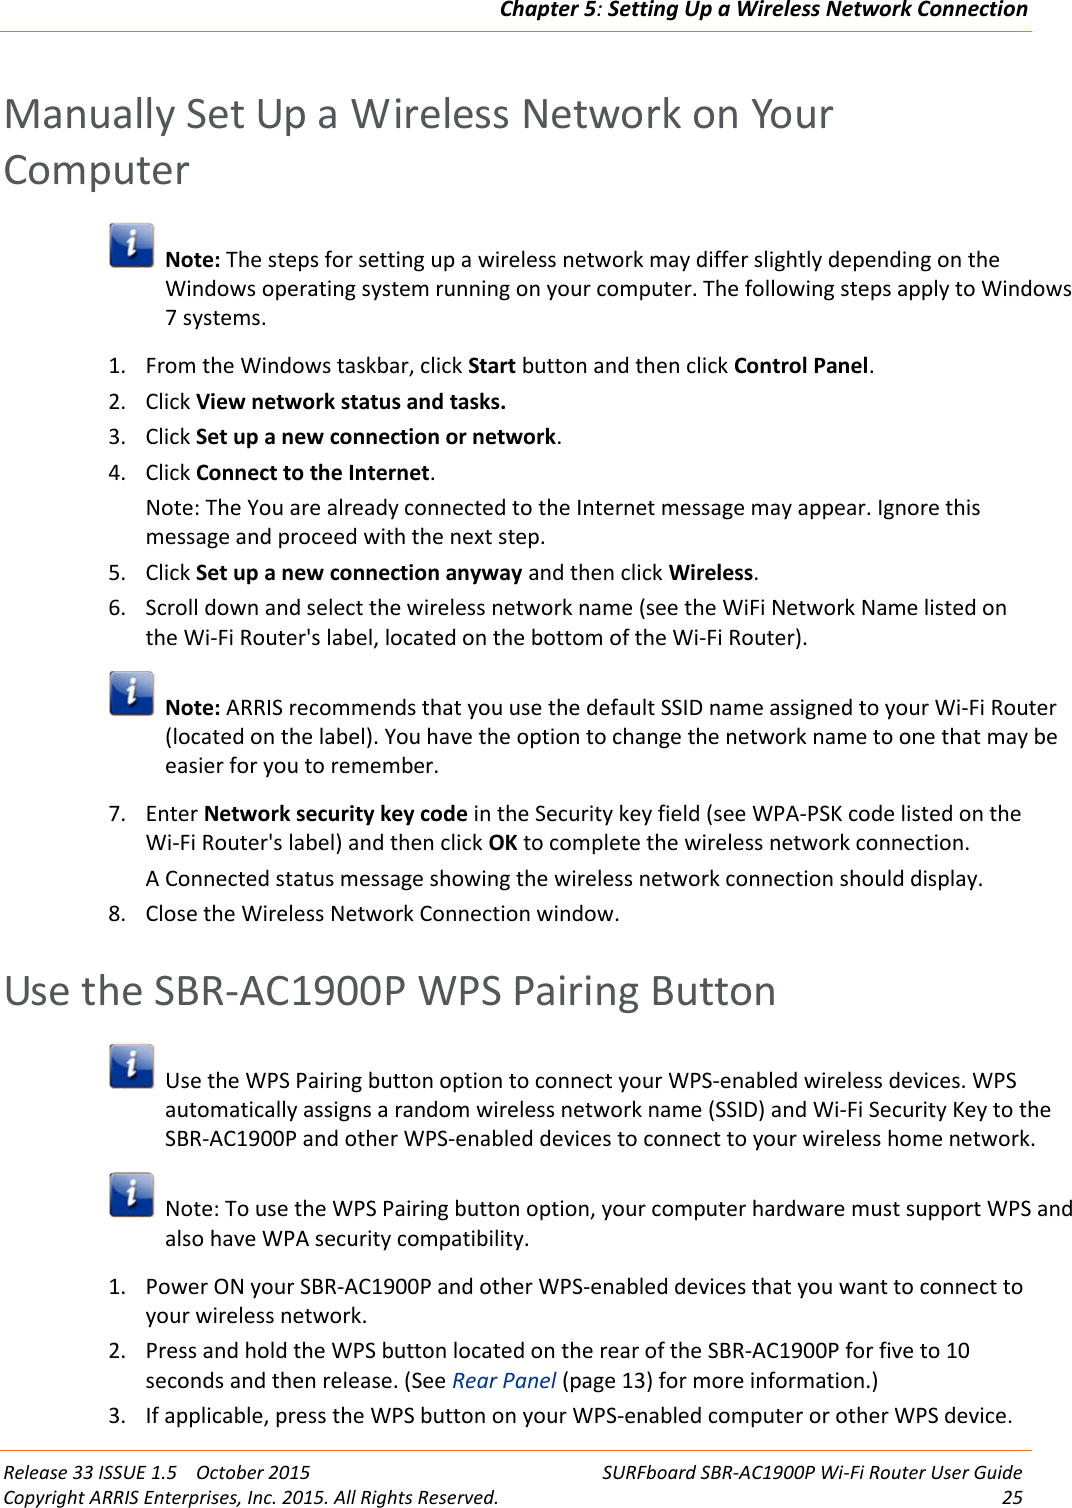 Chapter 5:Setting Up a Wireless Network ConnectionRelease 33 ISSUE 1.5 October 2015 SURFboard SBR-AC1900P Wi-Fi Router User GuideCopyright ARRIS Enterprises, Inc. 2015. All Rights Reserved. 25Manually Set Up a Wireless Network on YourComputerNote: The steps for setting up a wireless network may differ slightly depending on theWindows operating system running on your computer. The following steps apply to Windows7 systems.1. From the Windows taskbar, click Start button and then click Control Panel.2. Click View network status and tasks.3. Click Set up a new connection or network.4. Click Connect to the Internet.Note: The You are already connected to the Internet message may appear. Ignore thismessage and proceed with the next step.5. Click Set up a new connection anyway and then click Wireless.6. Scroll down and select the wireless network name (see the WiFi Network Name listed onthe Wi-Fi Router&apos;s label, located on the bottom of the Wi-Fi Router).Note: ARRIS recommends that you use the default SSID name assigned to your Wi-Fi Router(located on the label). You have the option to change the network name to one that may beeasier for you to remember.7. Enter Network security key code in the Security key field (see WPA-PSK code listed on theWi-Fi Router&apos;s label) and then click OK to complete the wireless network connection.A Connected status message showing the wireless network connection should display.8. Close the Wireless Network Connection window.Use the SBR-AC1900P WPS Pairing ButtonUse the WPS Pairing button option to connect your WPS-enabled wireless devices. WPSautomatically assigns a random wireless network name (SSID) and Wi-Fi Security Key to theSBR-AC1900P and other WPS-enabled devices to connect to your wireless home network.Note: To use the WPS Pairing button option, your computer hardware must support WPS andalso have WPA security compatibility.1. Power ON your SBR-AC1900P and other WPS-enabled devices that you want to connect toyour wireless network.2. Press and hold the WPS button located on the rear of the SBR-AC1900P for five to 10seconds and then release. (See Rear Panel (page 13) for more information.)3. If applicable, press the WPS button on your WPS-enabled computer or other WPS device.